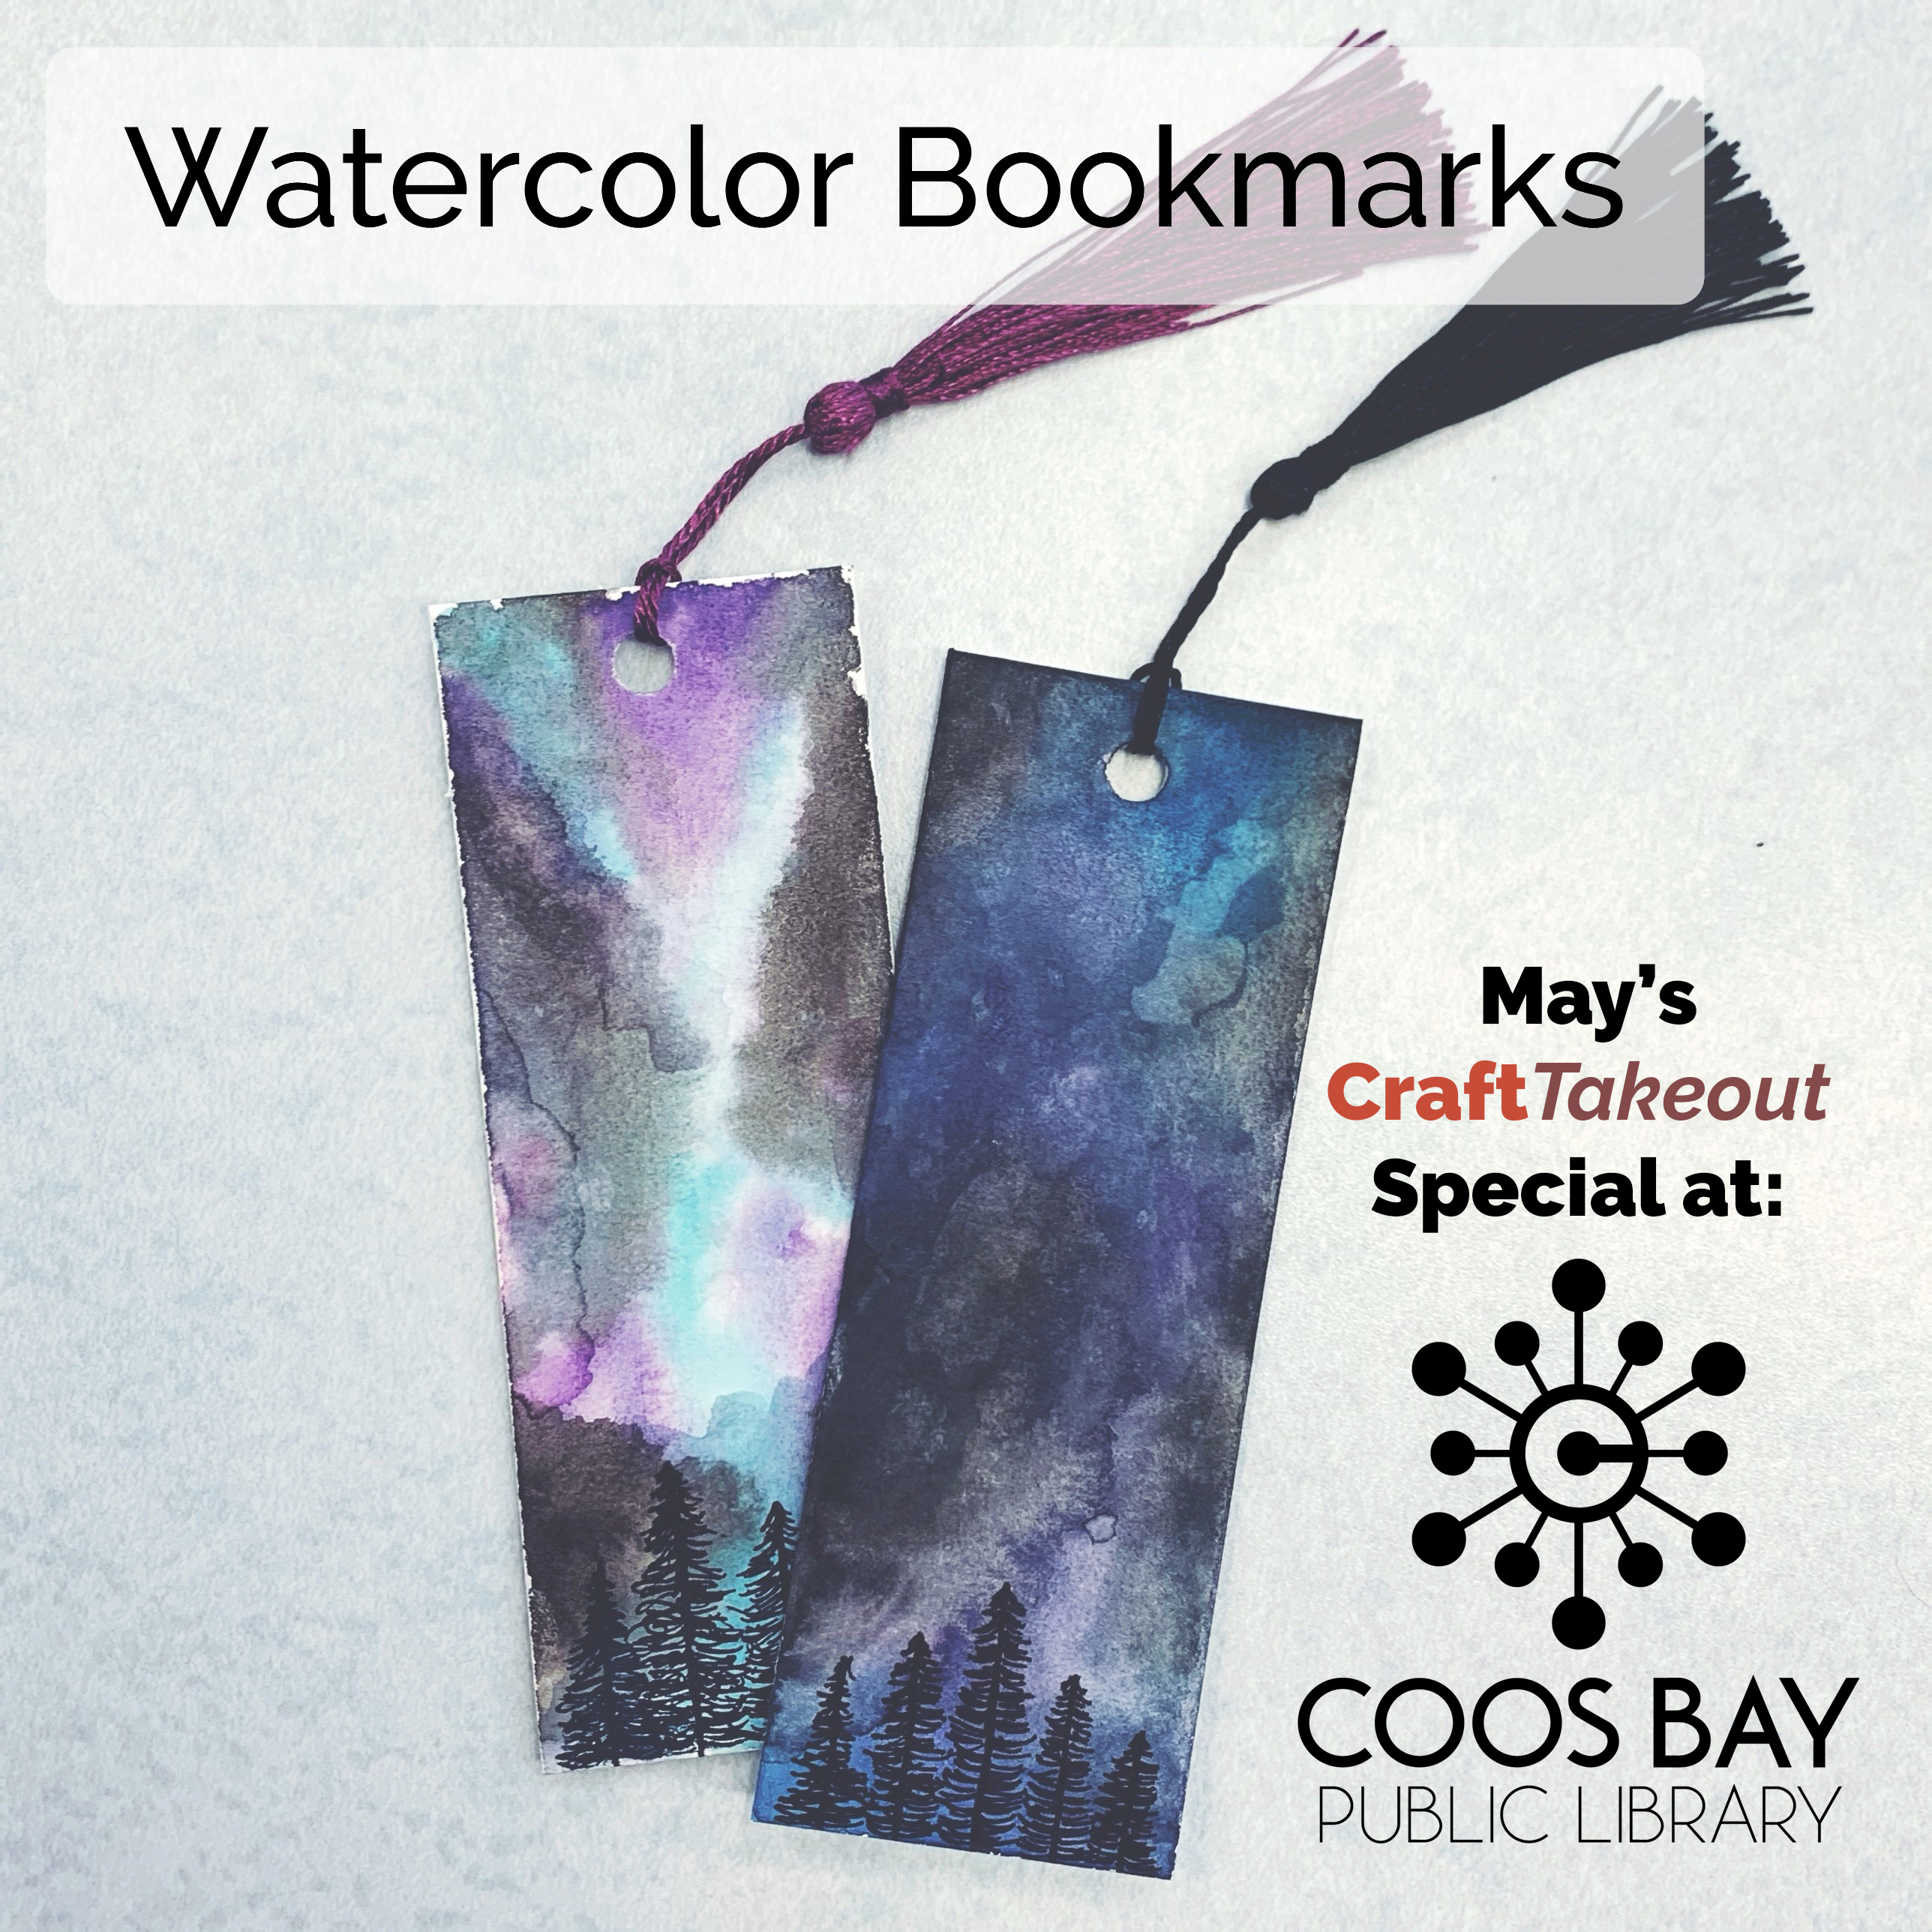 May's Craft Takeout Special at Coos Bay Public Library, Watercolor Bookmarks